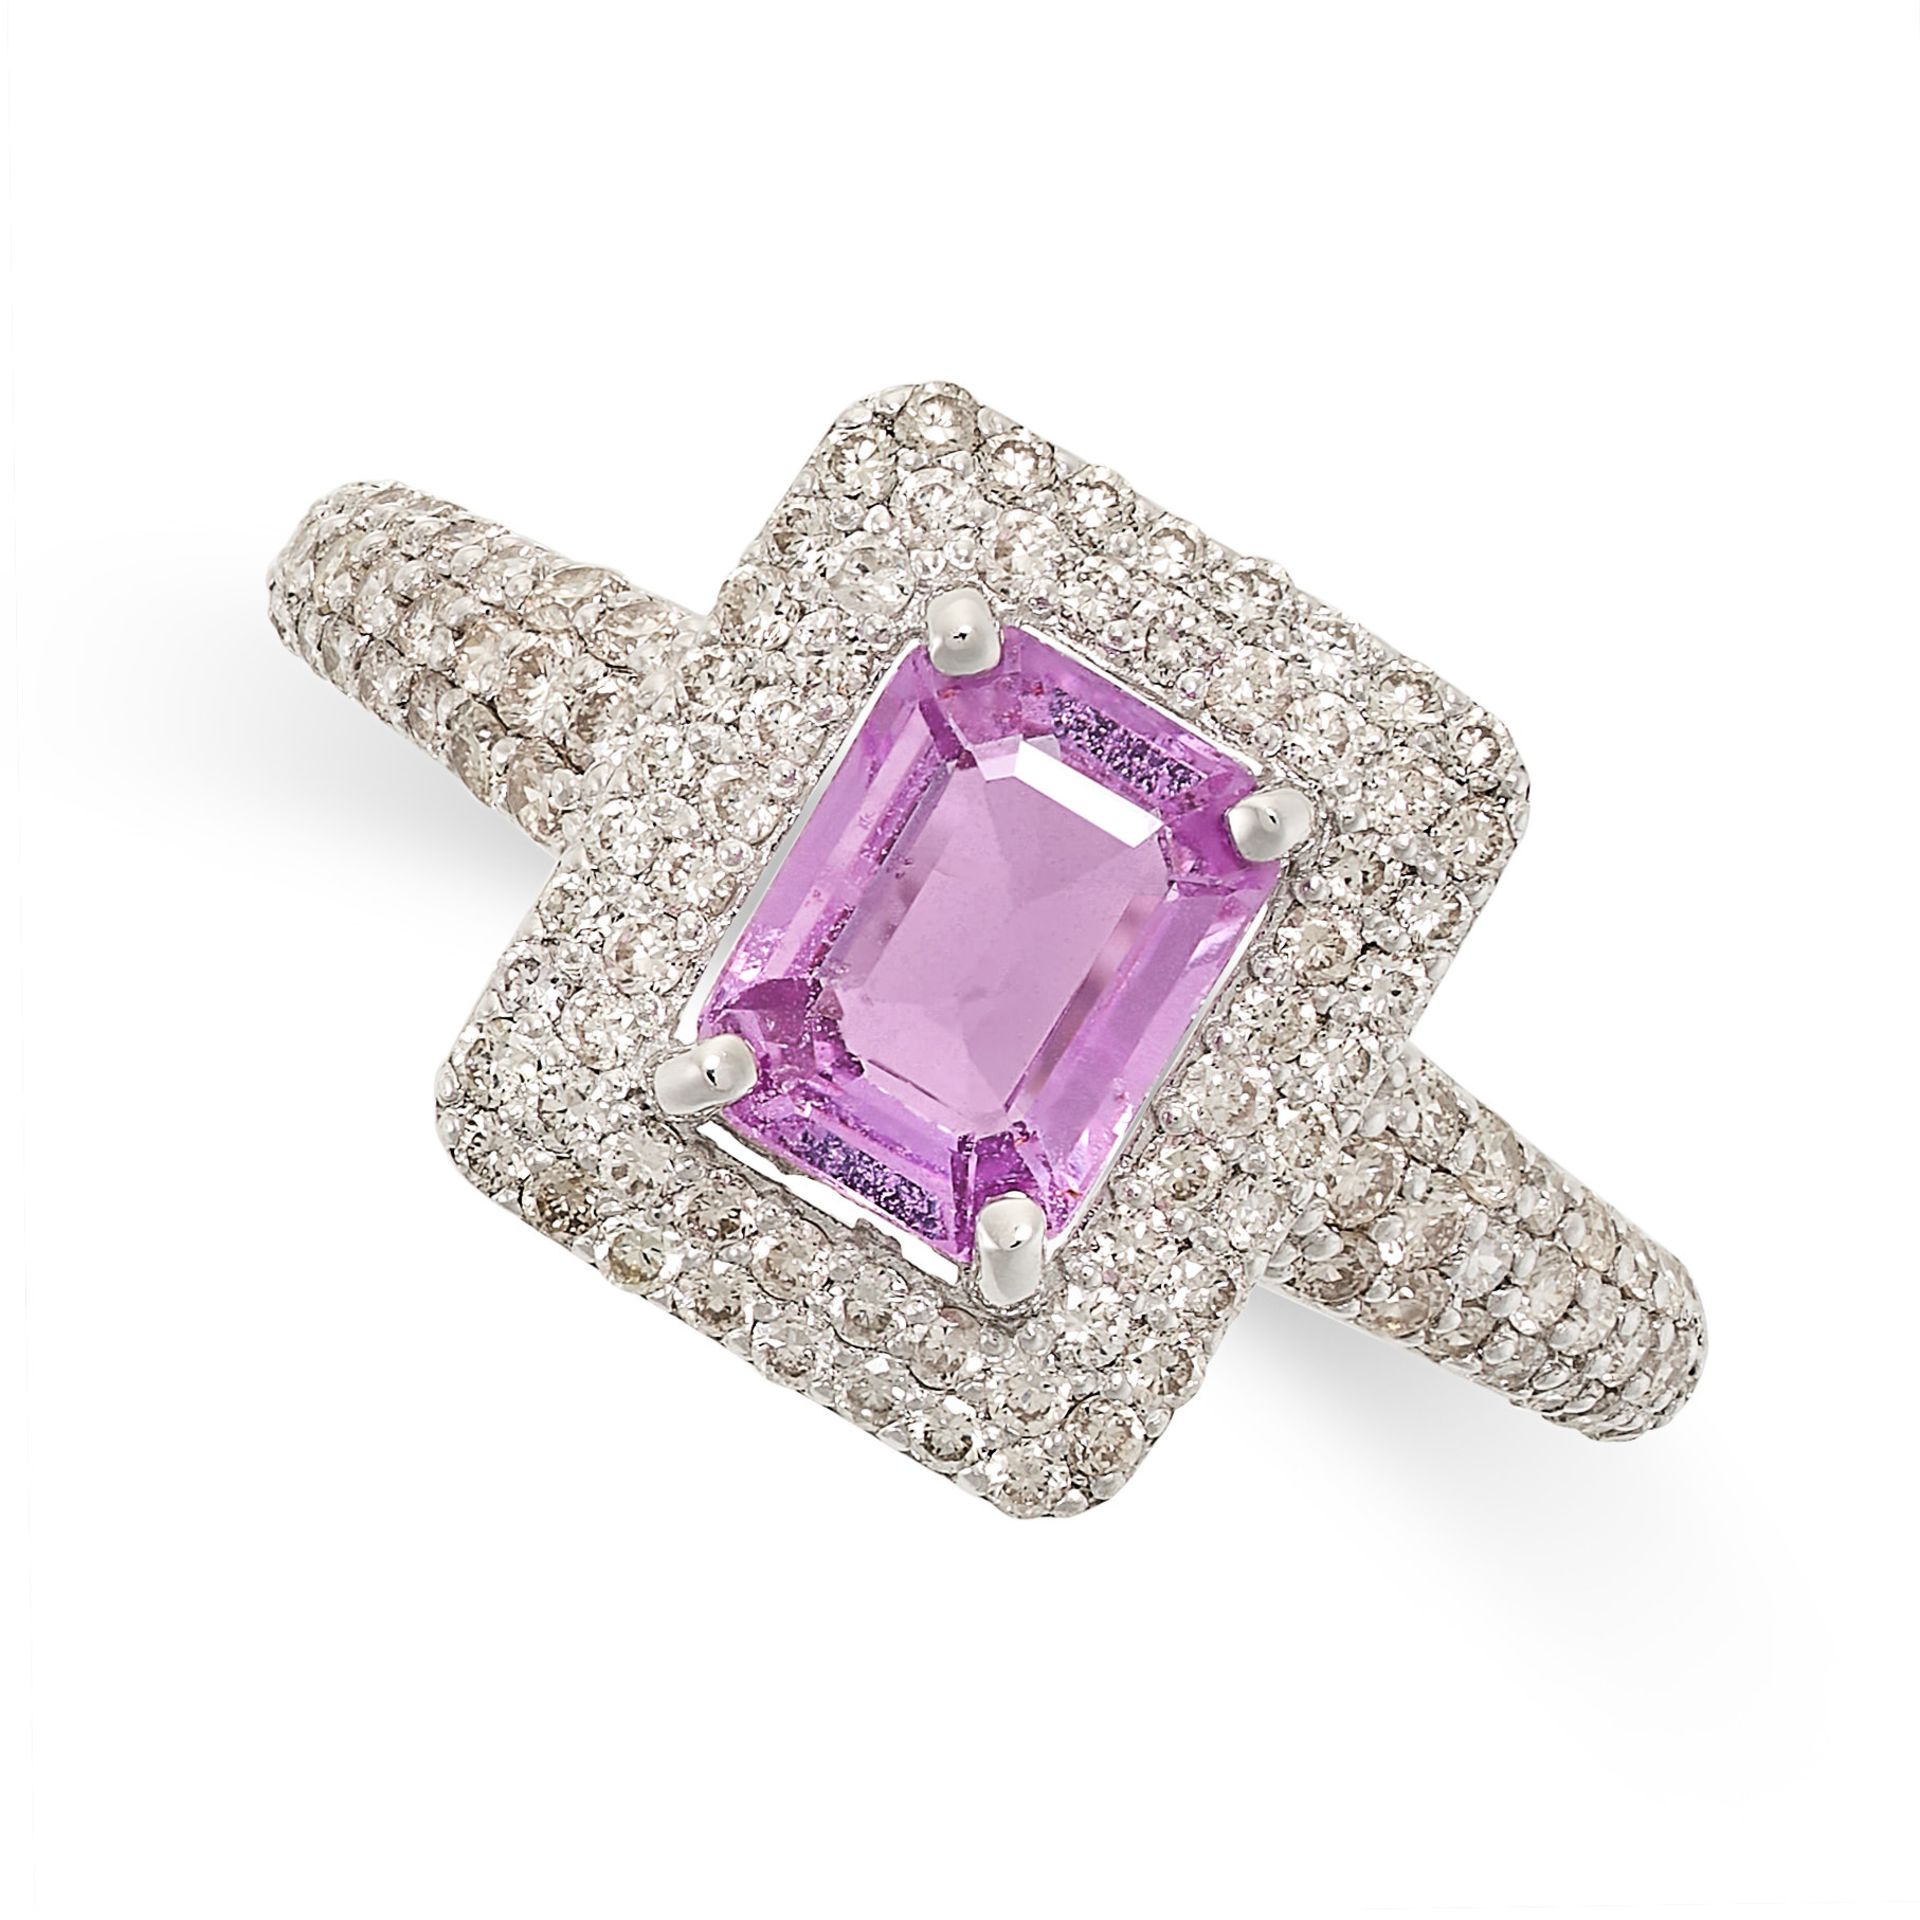 A PINK SAPPHIRE AND DIAMOND DRESS RING in 18ct white gold, set with an emerald cut pink sapphire